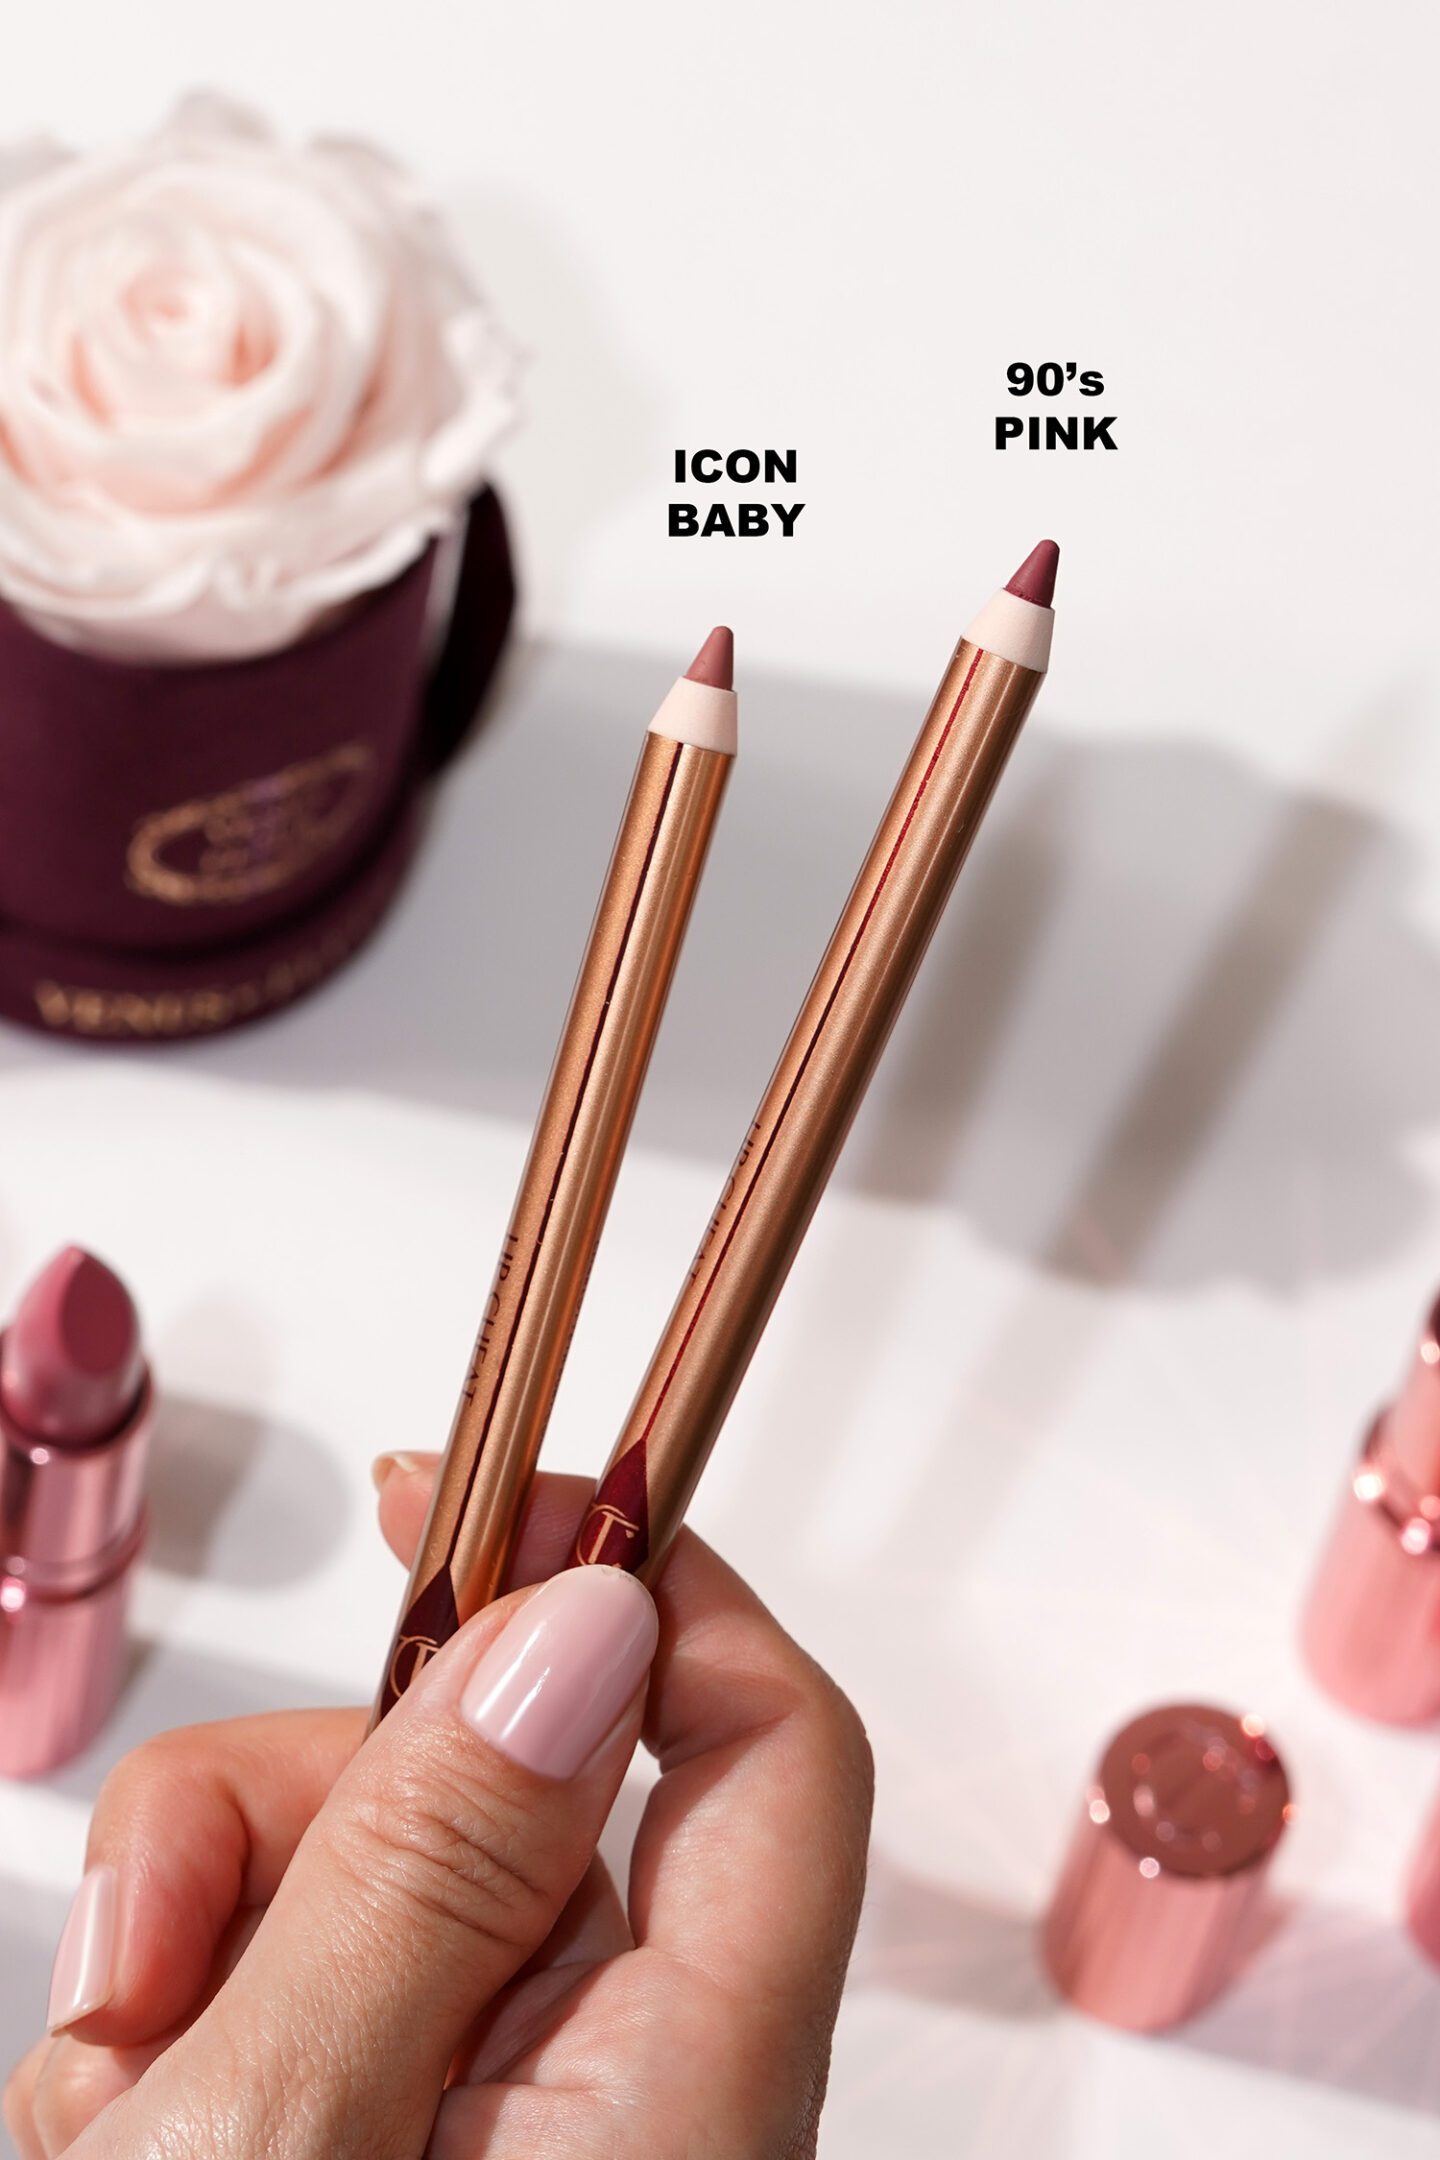 NEW Charlotte Tilbury Hollywood Beauty Icon Lip Cheat Icon Baby and 90s Pink